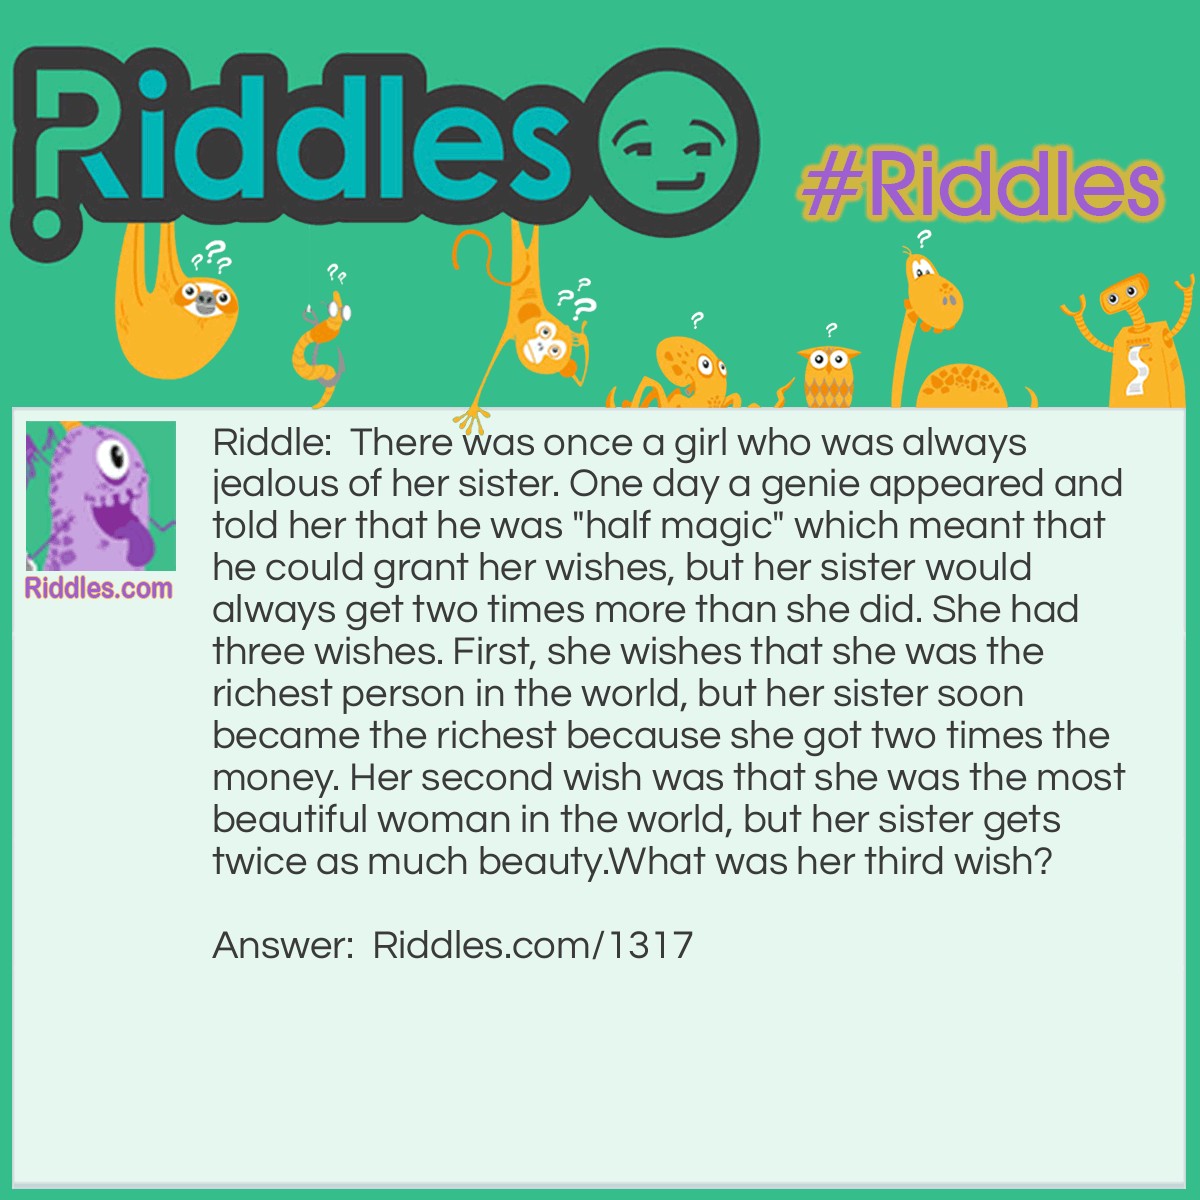 Riddle: There was once a girl who was always jealous of her sister. One day a genie appeared and told her that he was "half magic" which meant that he could grant her wishes, but her sister would always get two times more than she did. She had three wishes. First, she wishes that she was the richest person in the world, but her sister soon became the richest because she got two times the money. Her second wish was that she be the most beautiful woman in the world, but her sister gets twice as much beauty.
What was her third wish? Answer: She asks the genie to grab a nearby stick and beat her half to death.